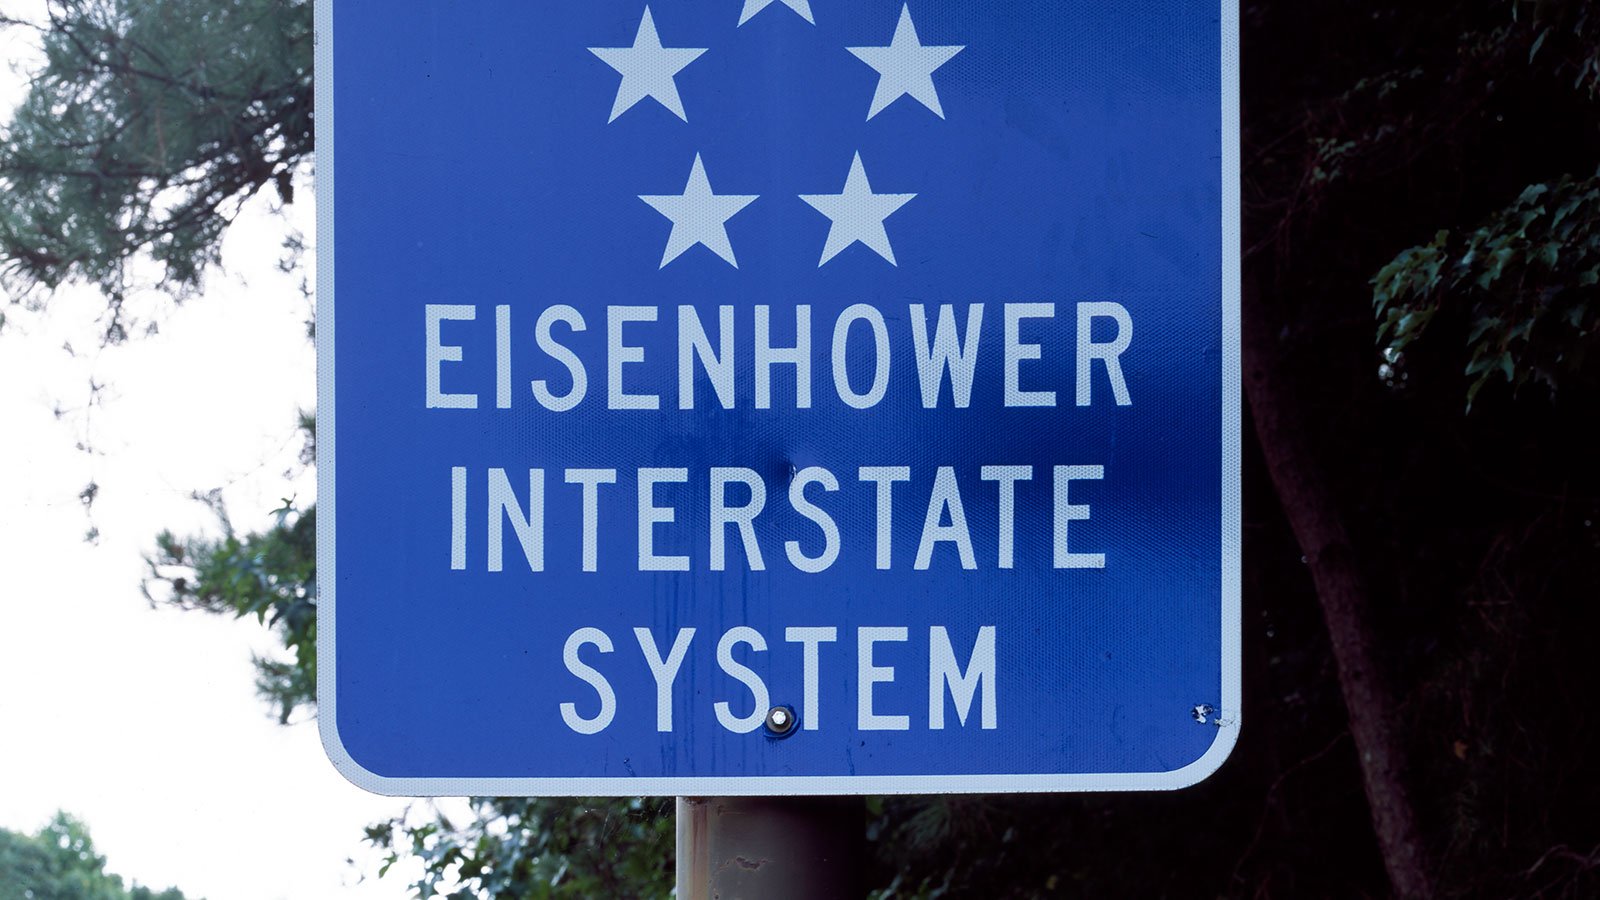 ign for the Interstate Highway System saluting President Dwight Eisenhower